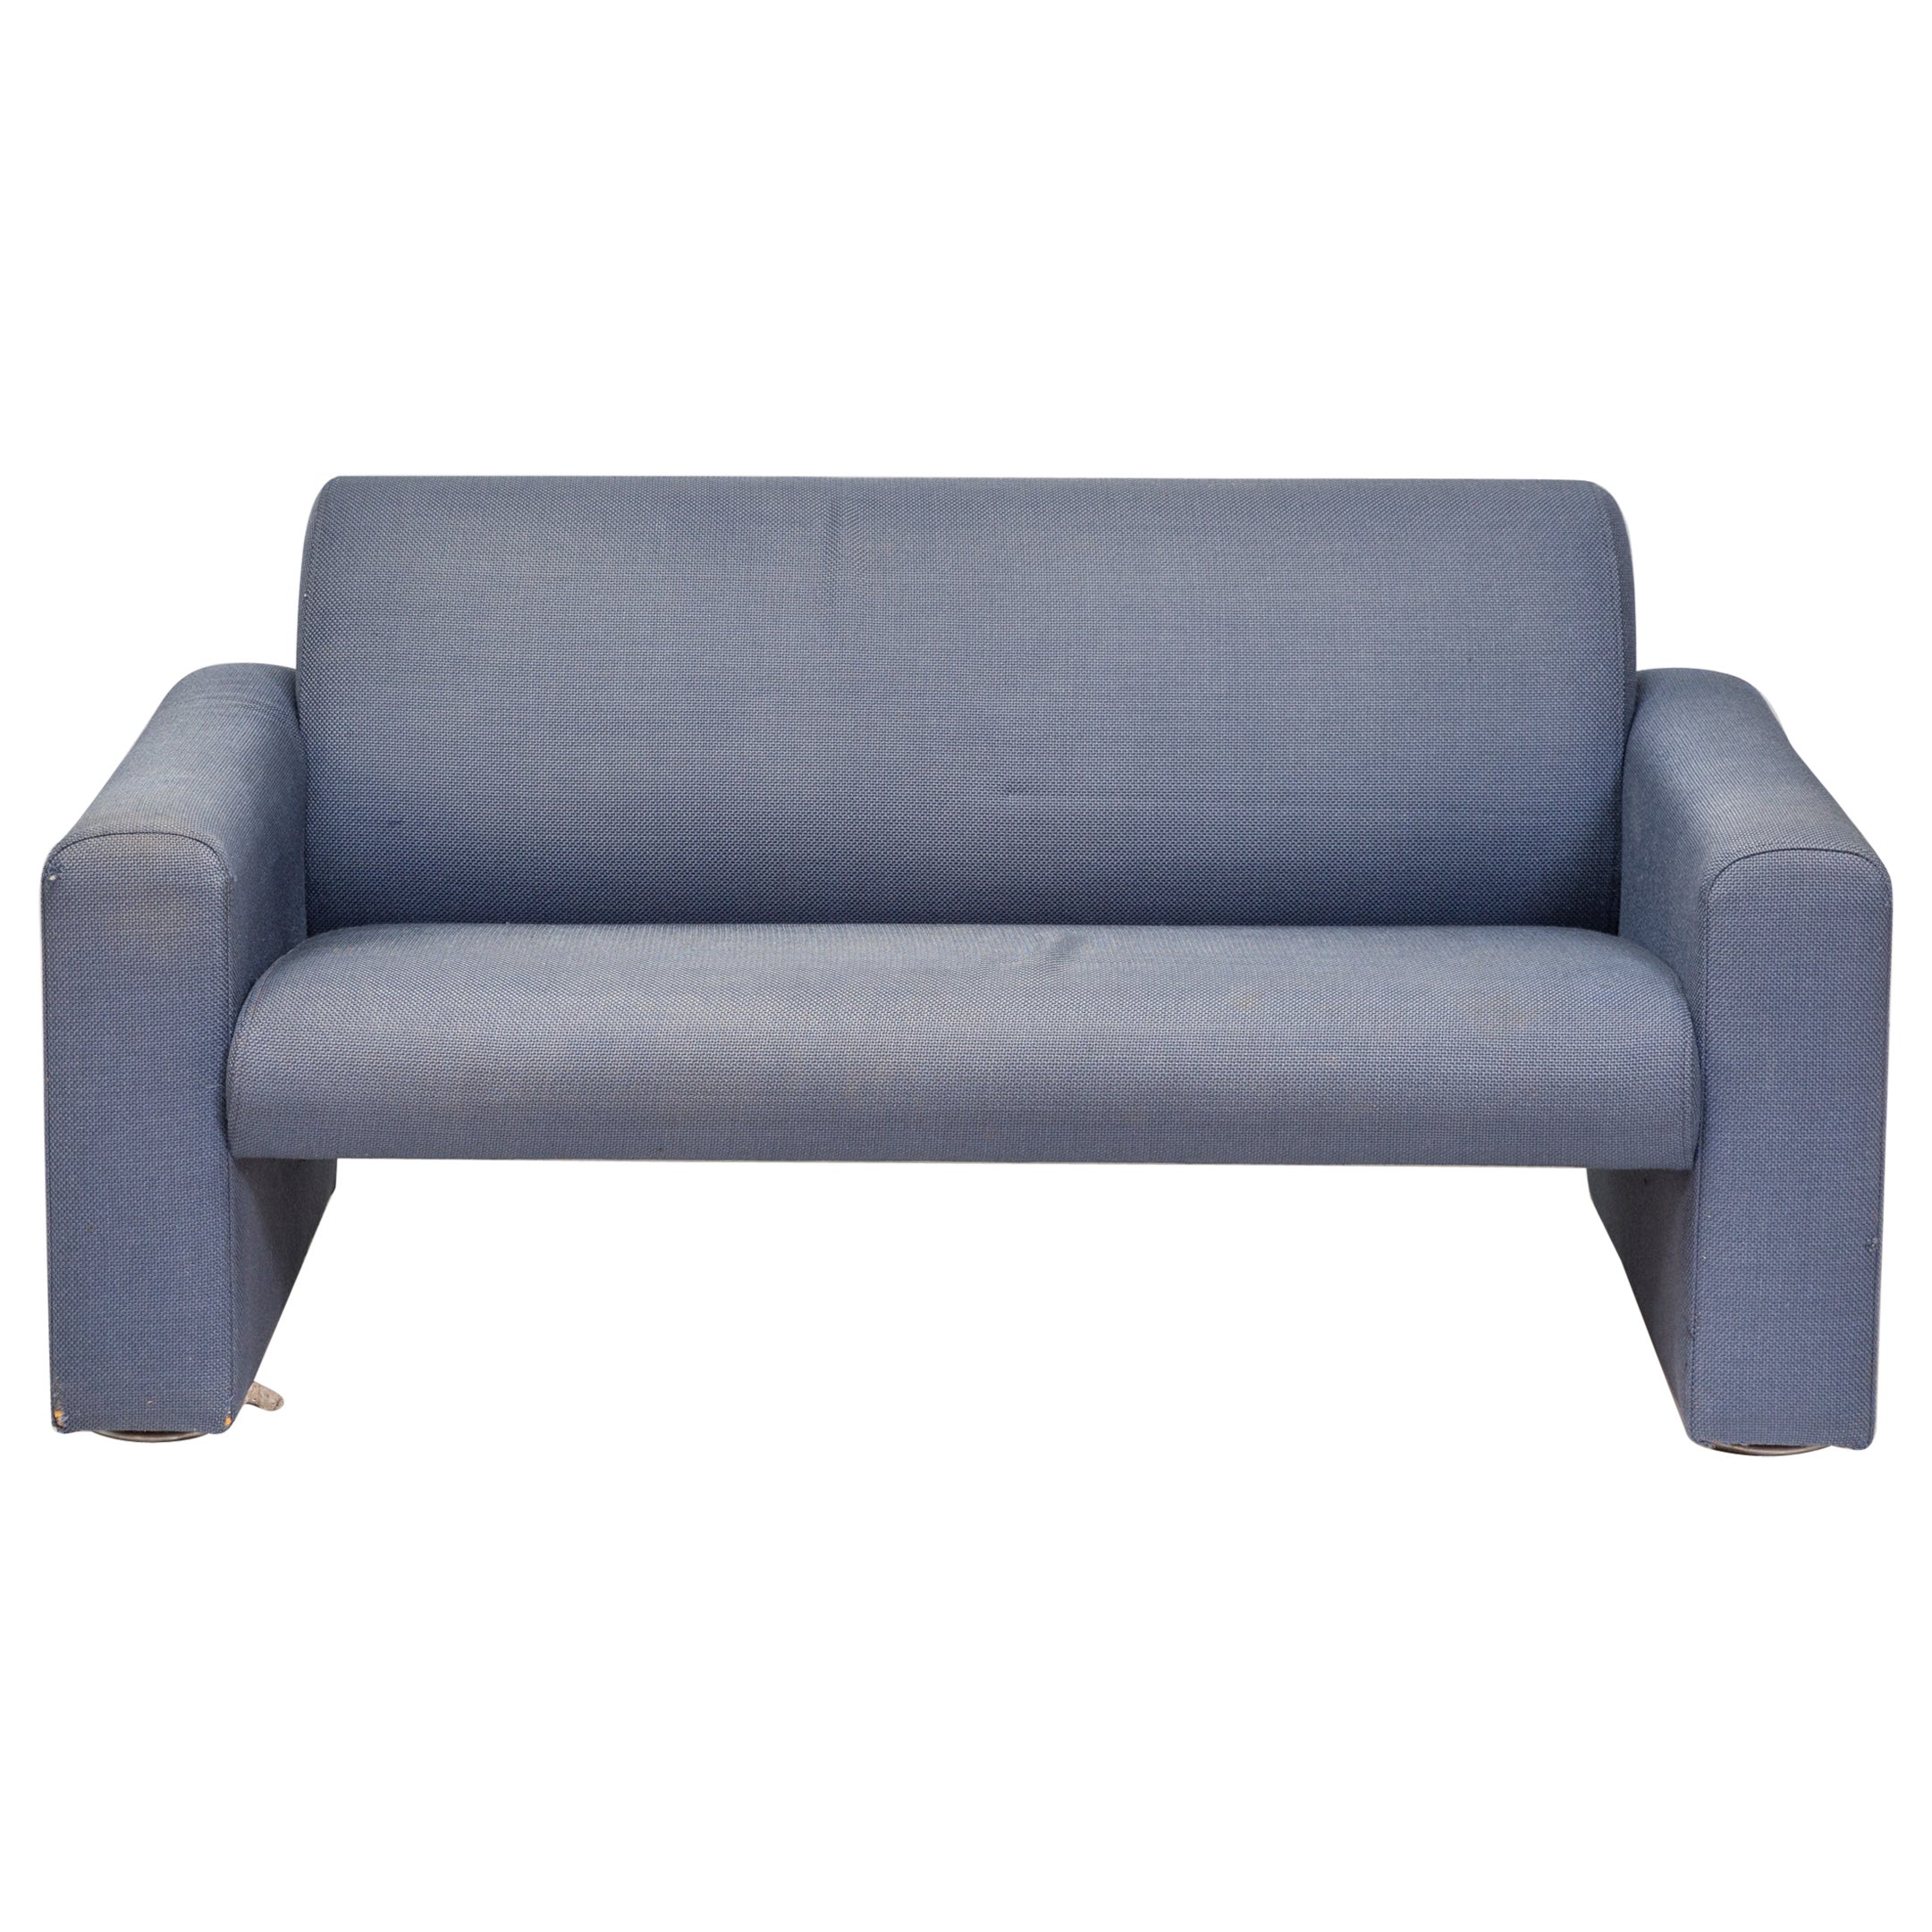 Artifort 691 Blue Fabric Sofa, 1980s For Sale